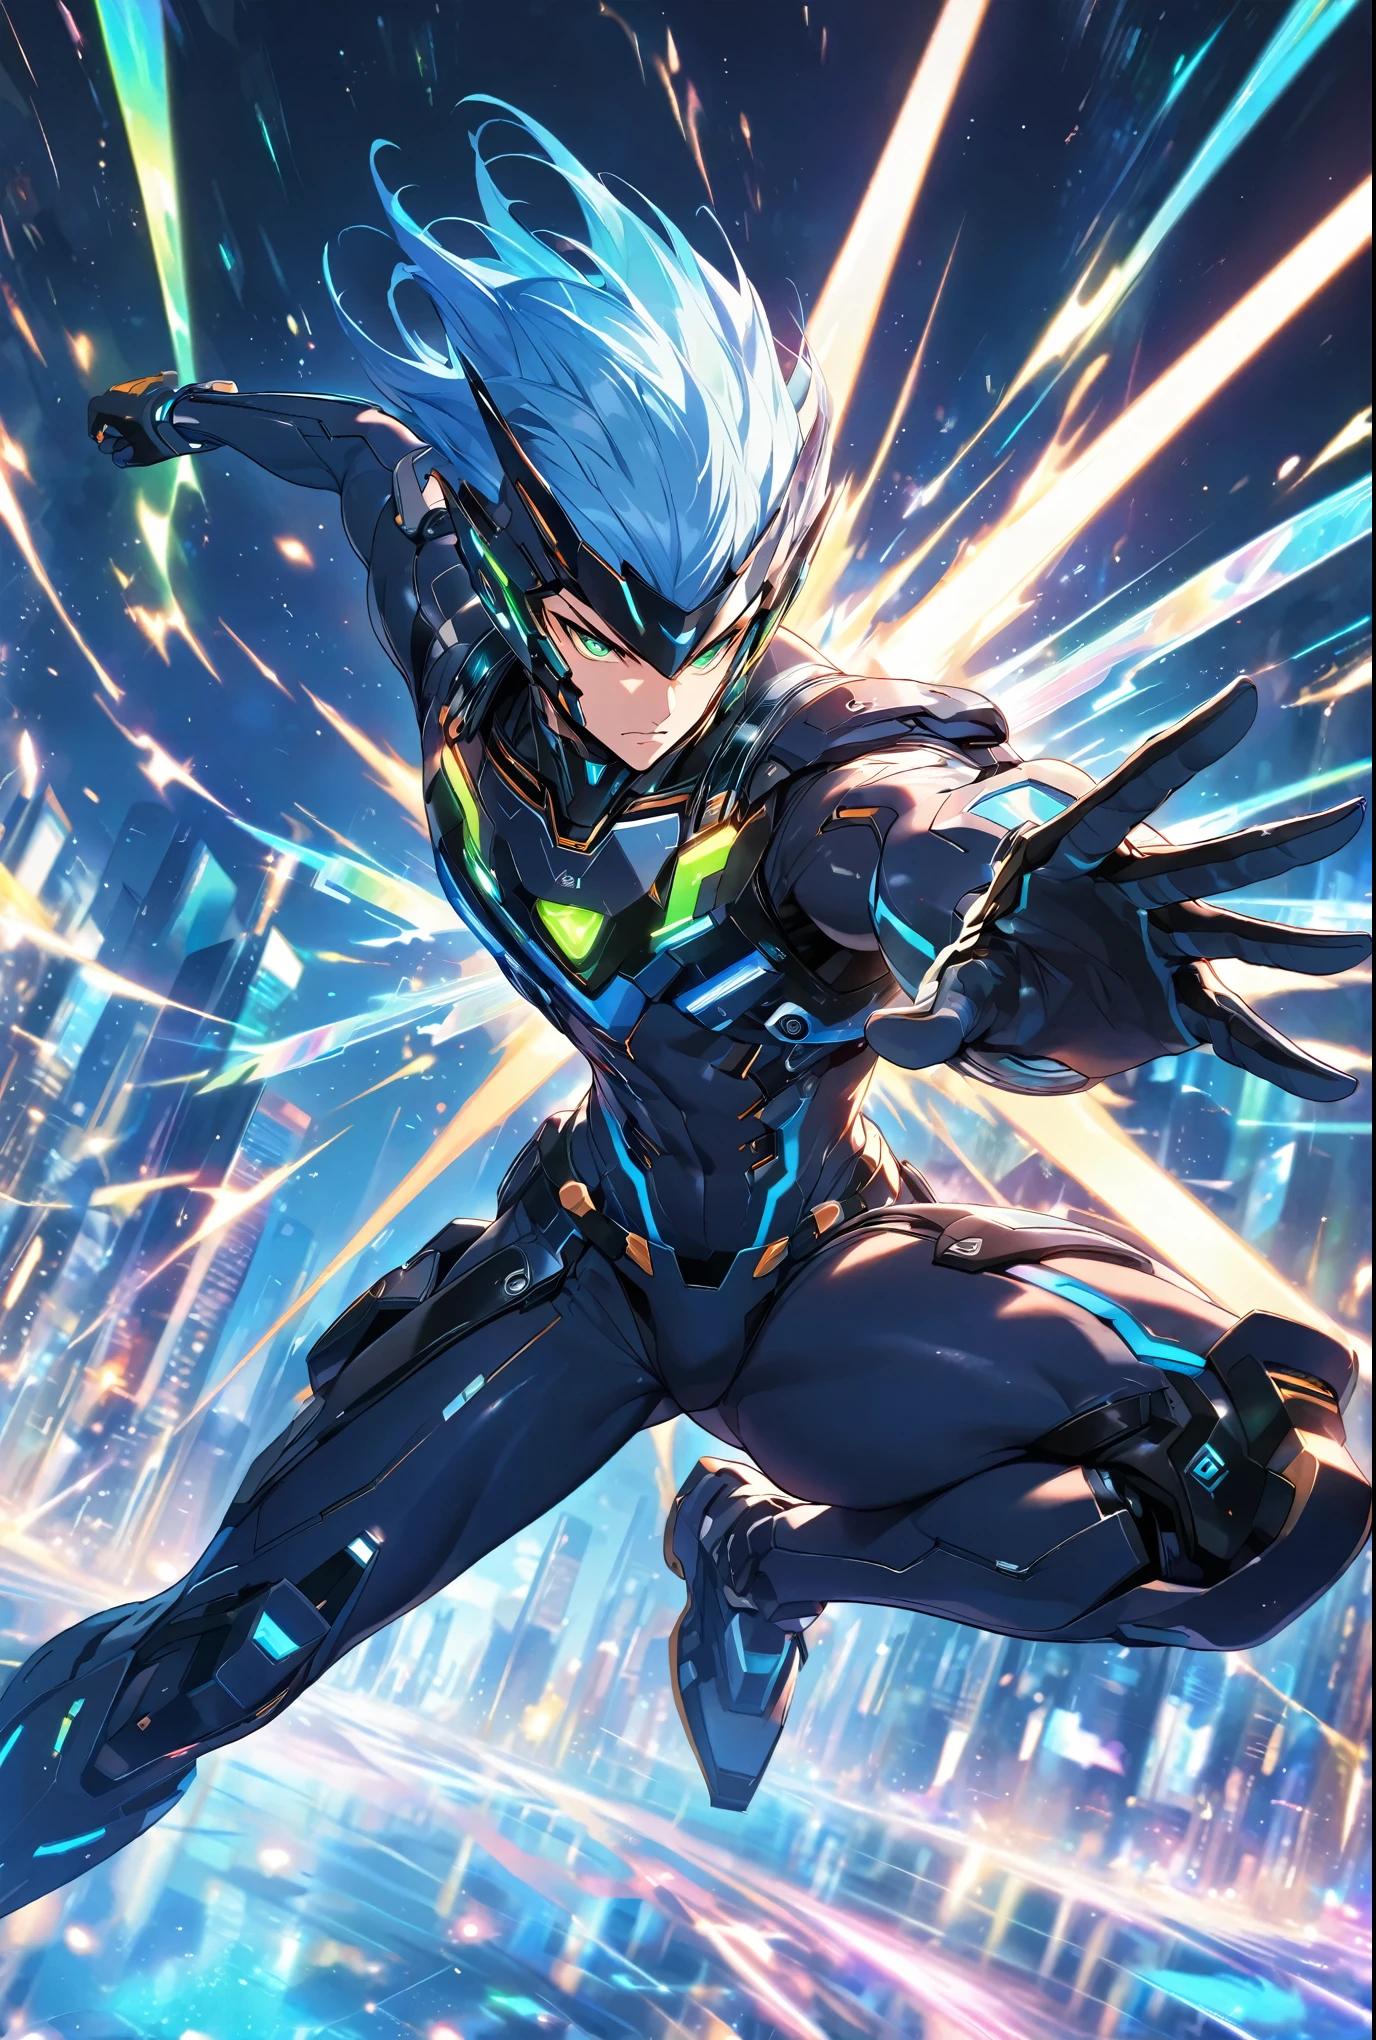 A dynamic male character in a futuristic black and blue cyber suit with glowing LED lines, short spiky blue hair, and sharp green eyes. He is tall, muscular, and has an energy backpack on his back. The character is in a combat pose, wielding energy blades, with a serious and focused expression. The background is a digital cityscape with floating holographic elements and light effects, representing a cybernetic world.